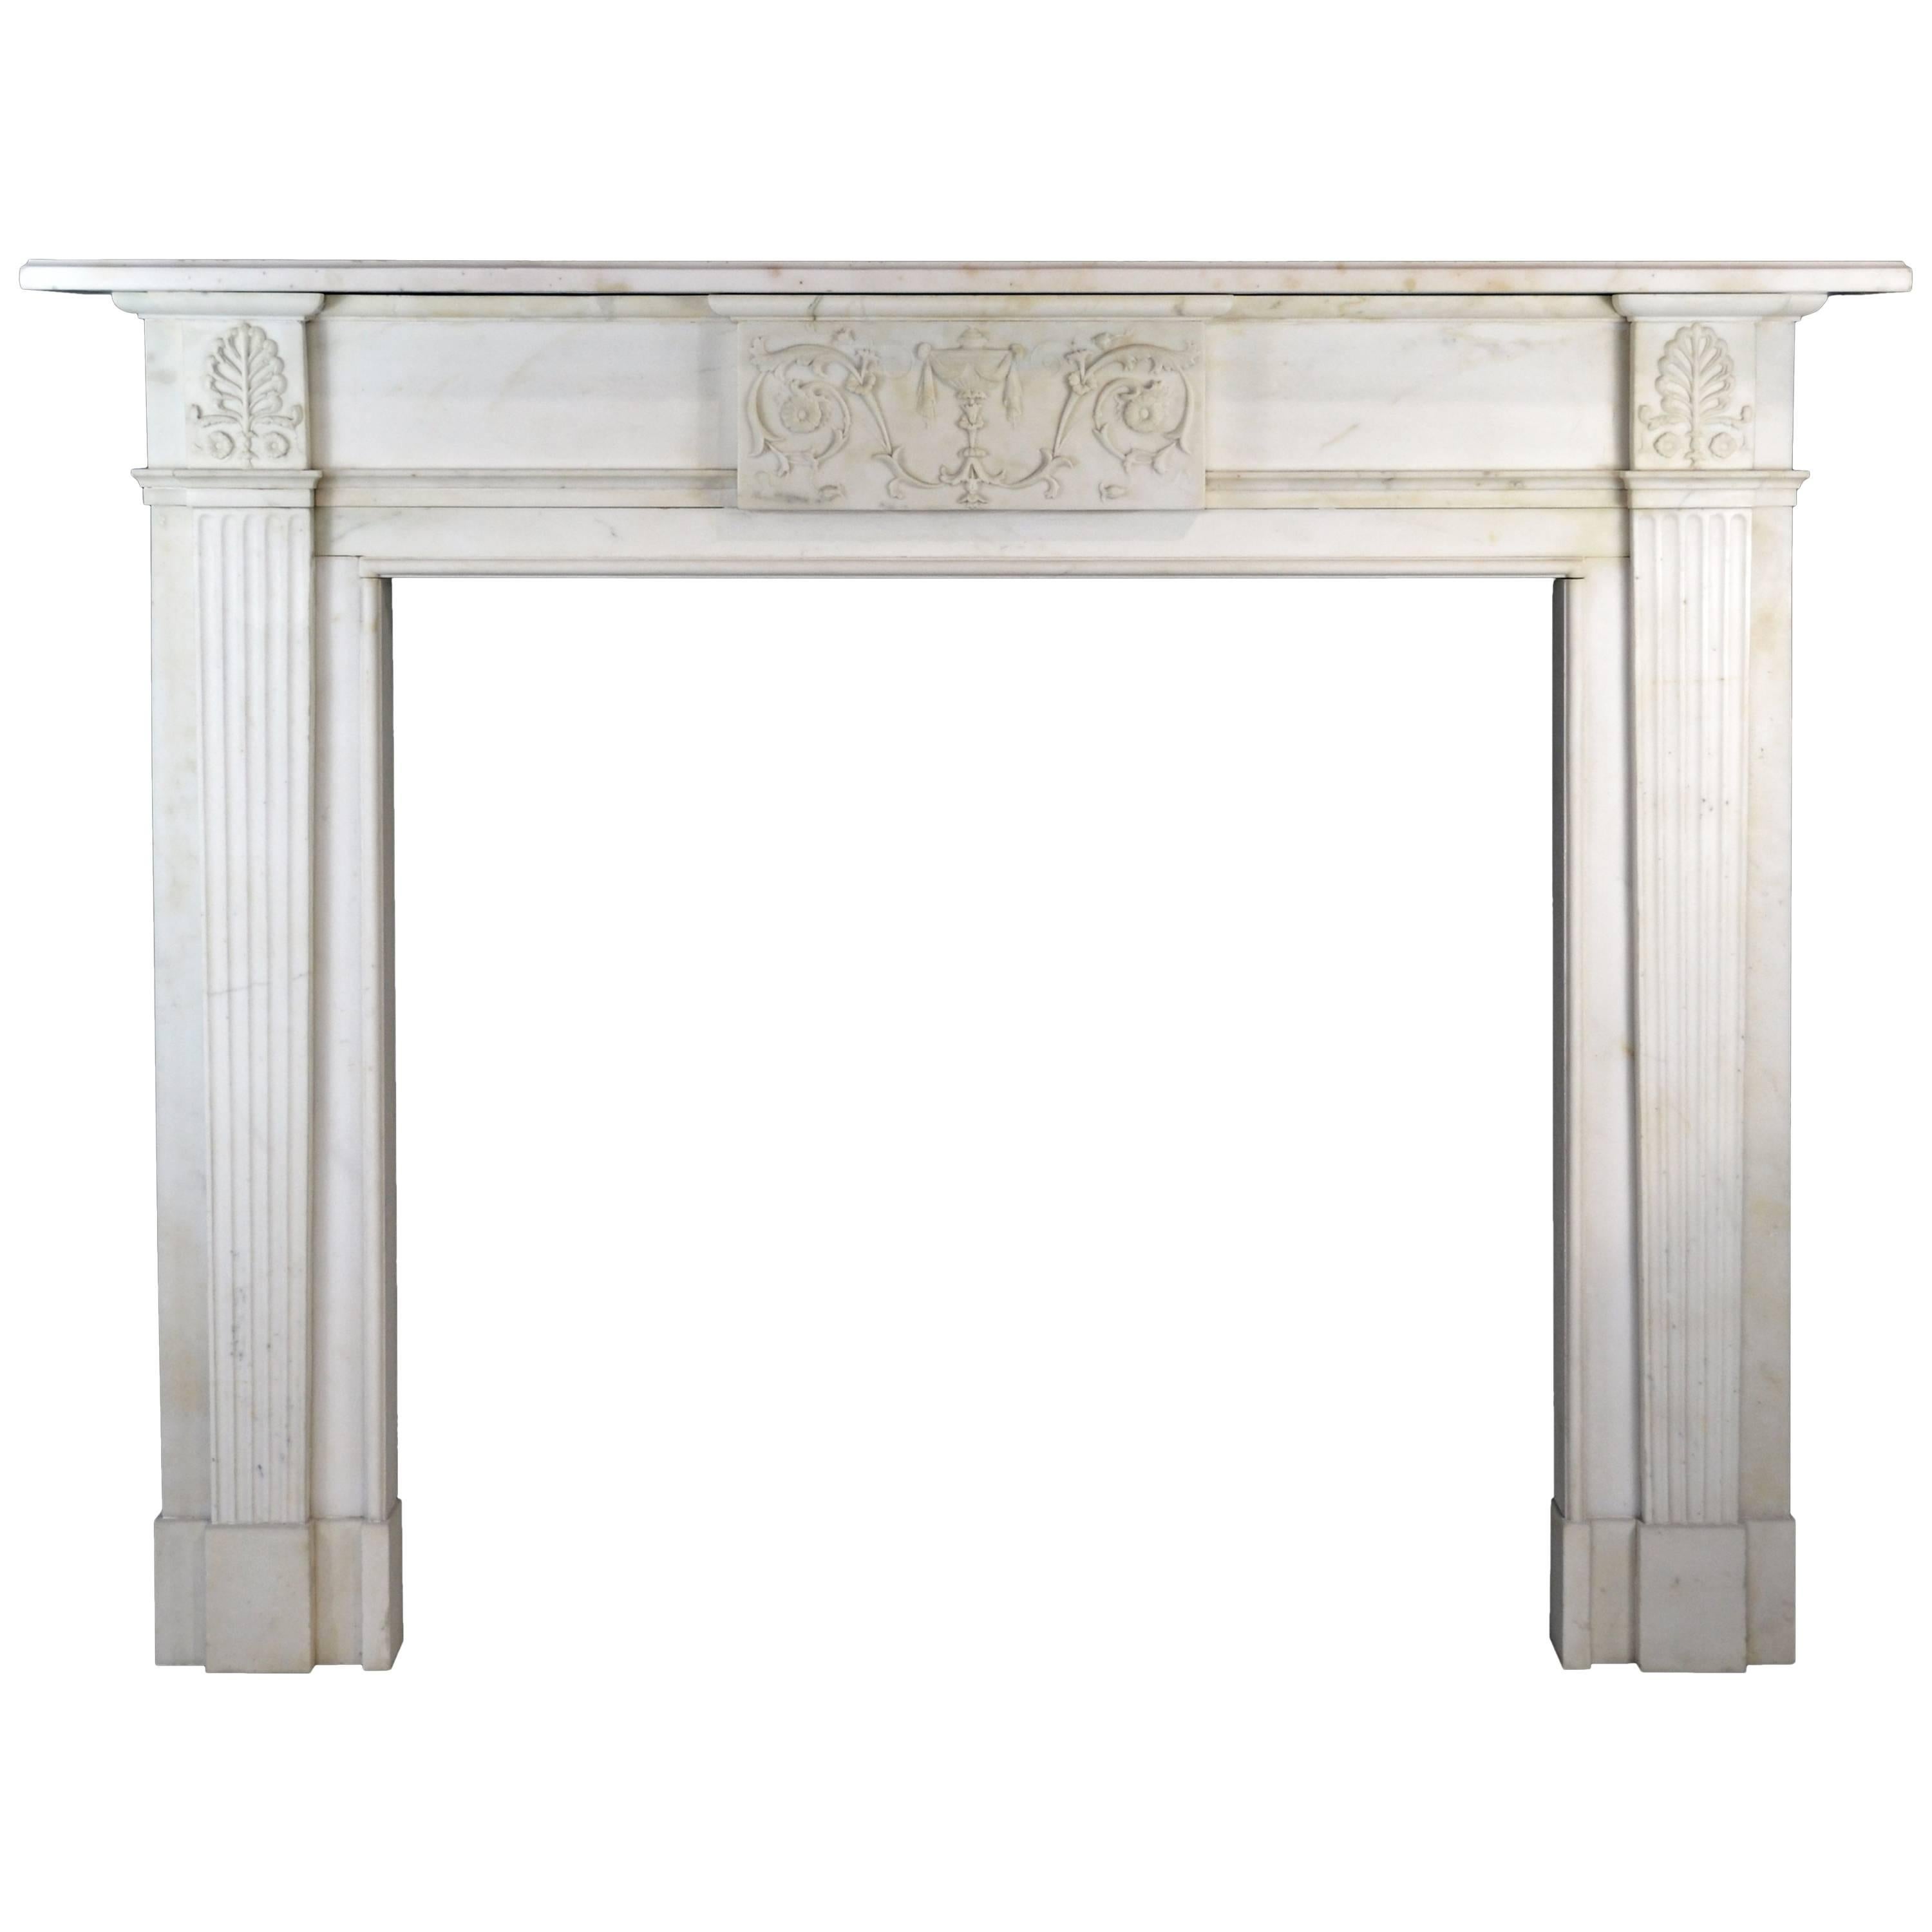 19th Century Neoclassical Statuary Marble Mantelpiece, 'GEO-ZE97' For Sale